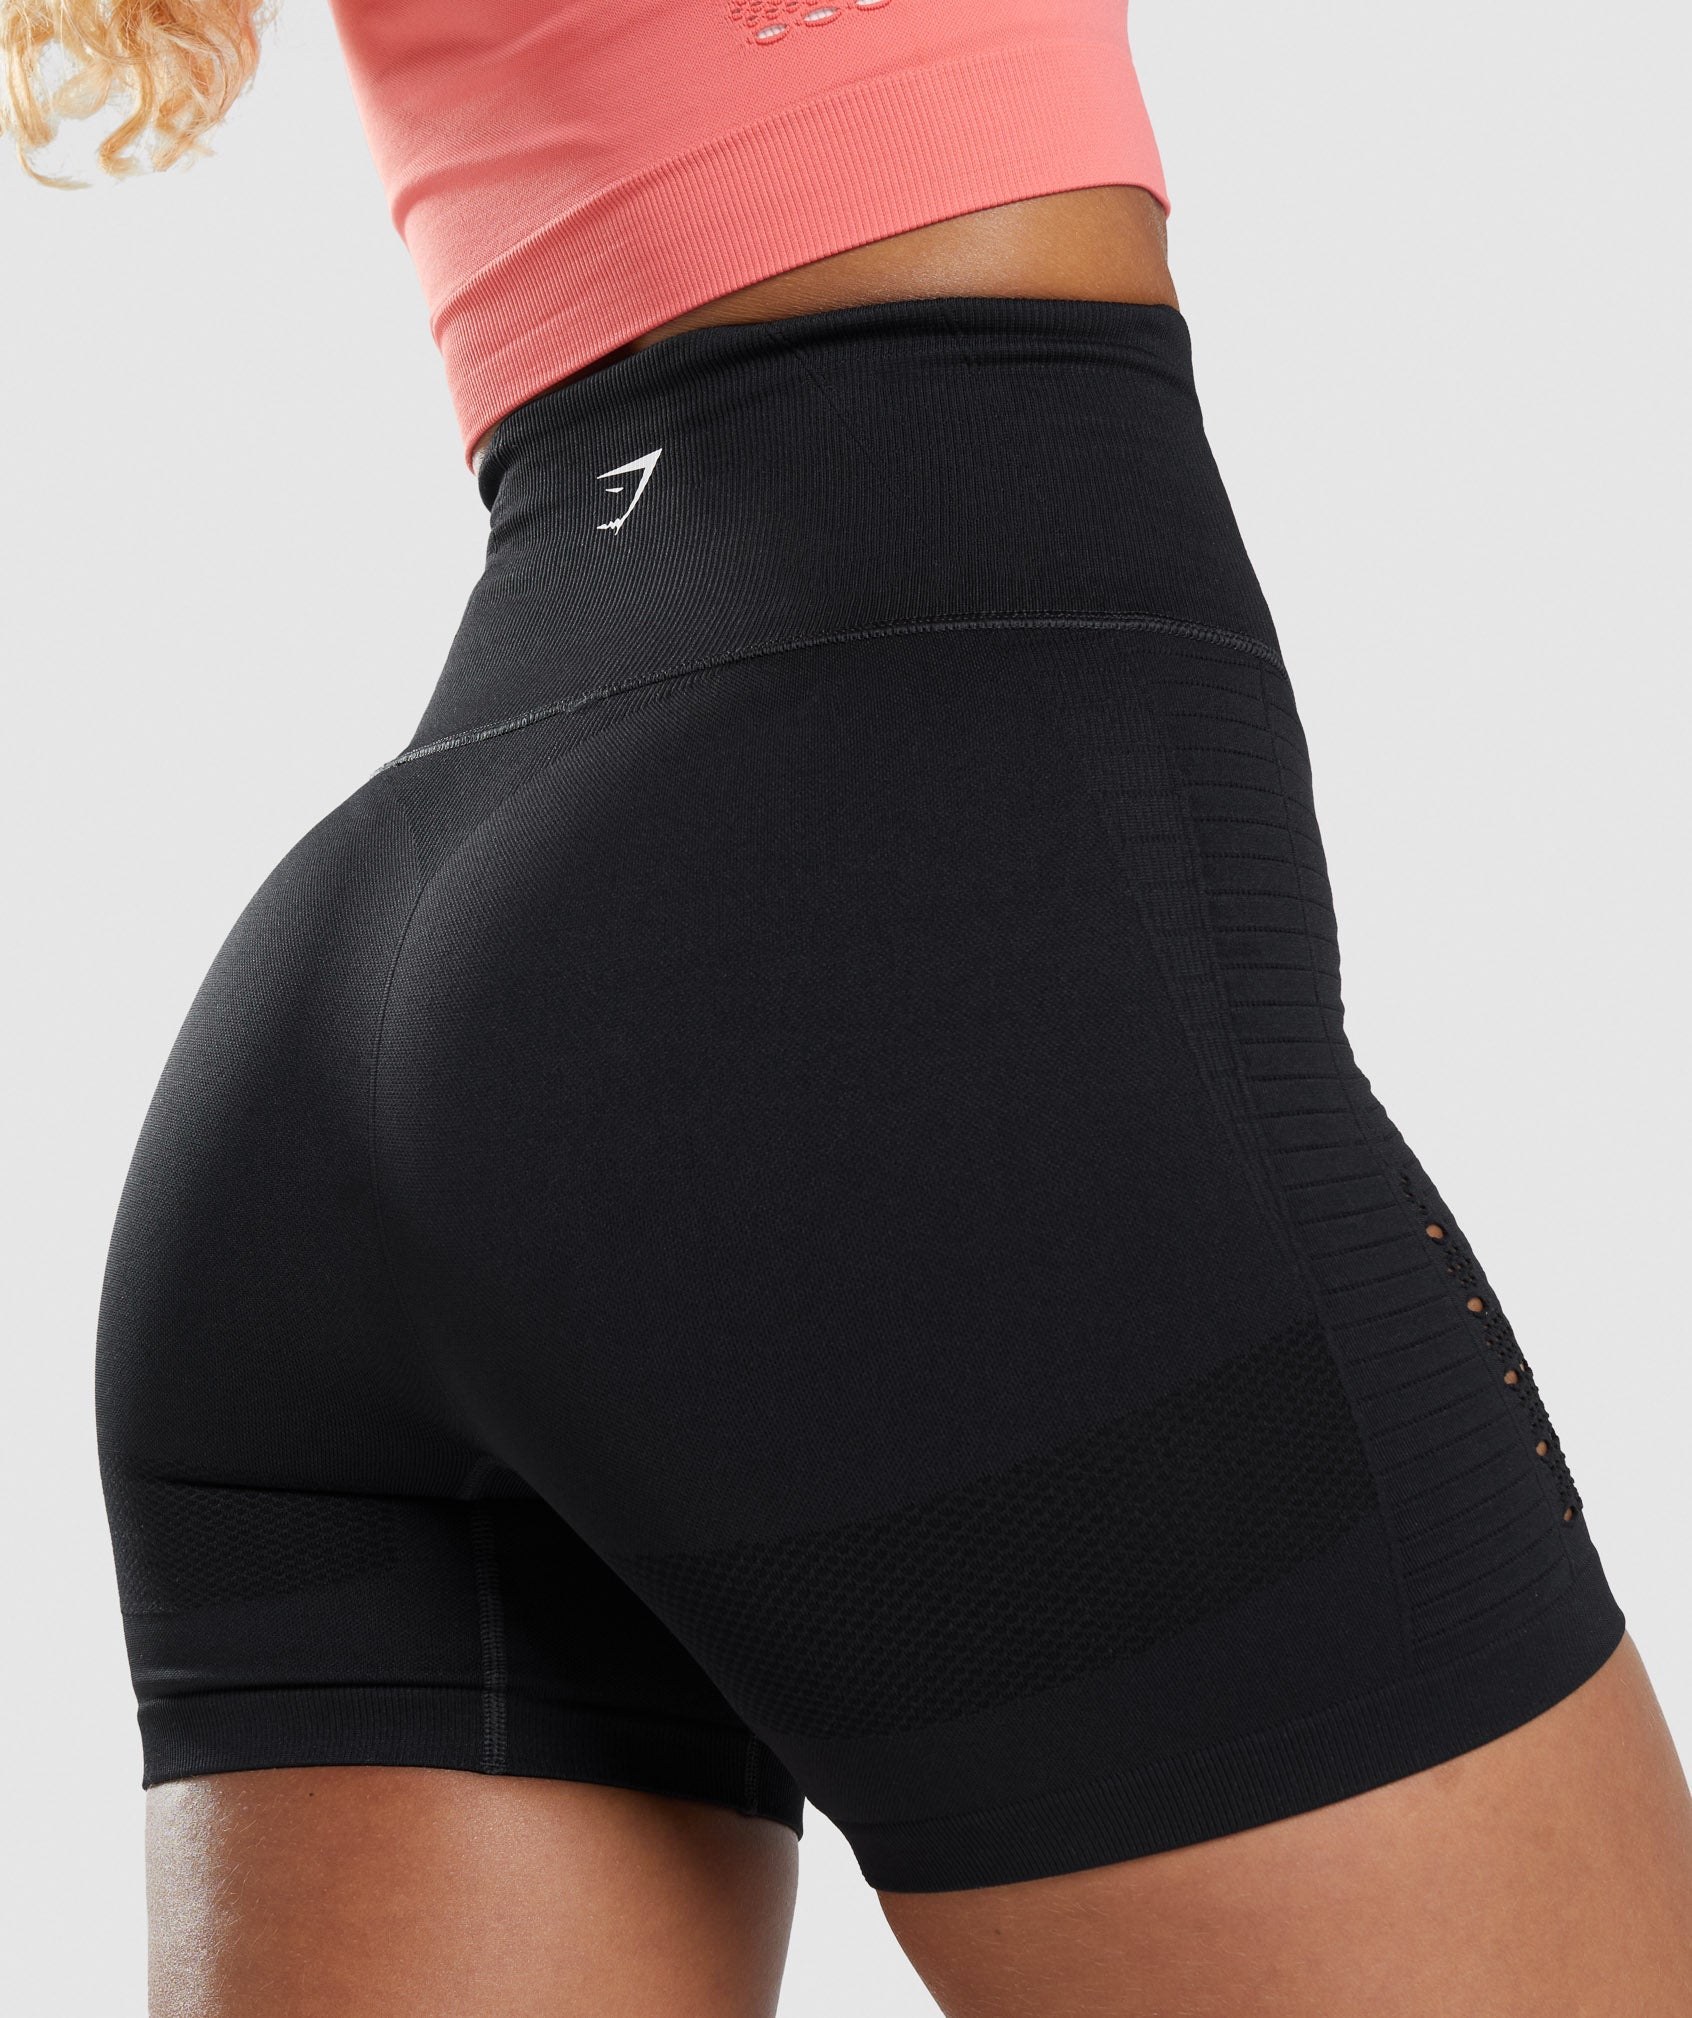 Energy Seamless Shorts in Black - view 7